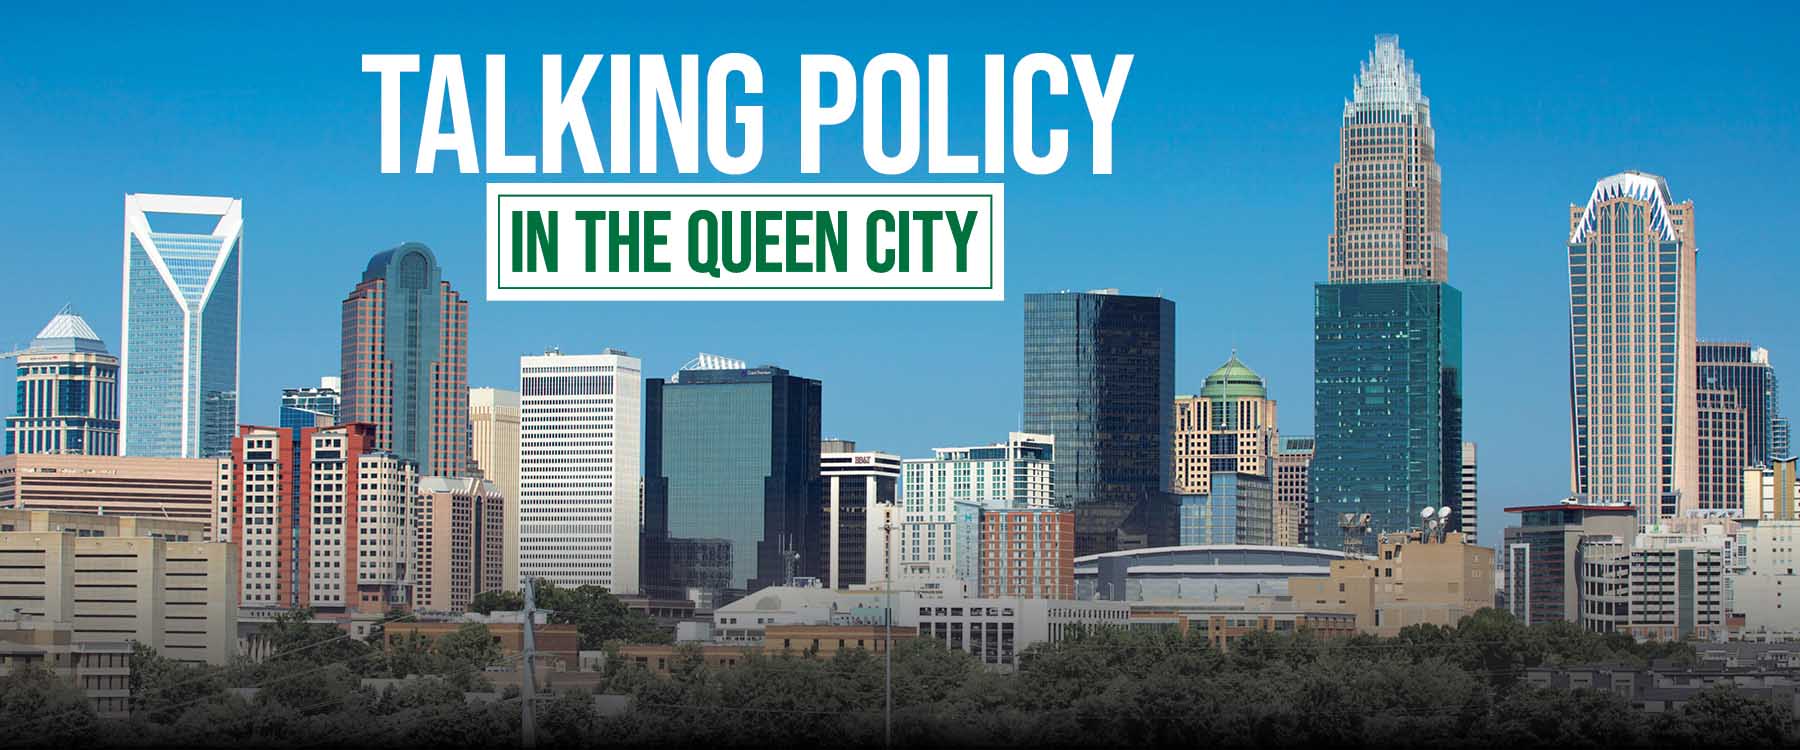 Talking Policy in the Queen City